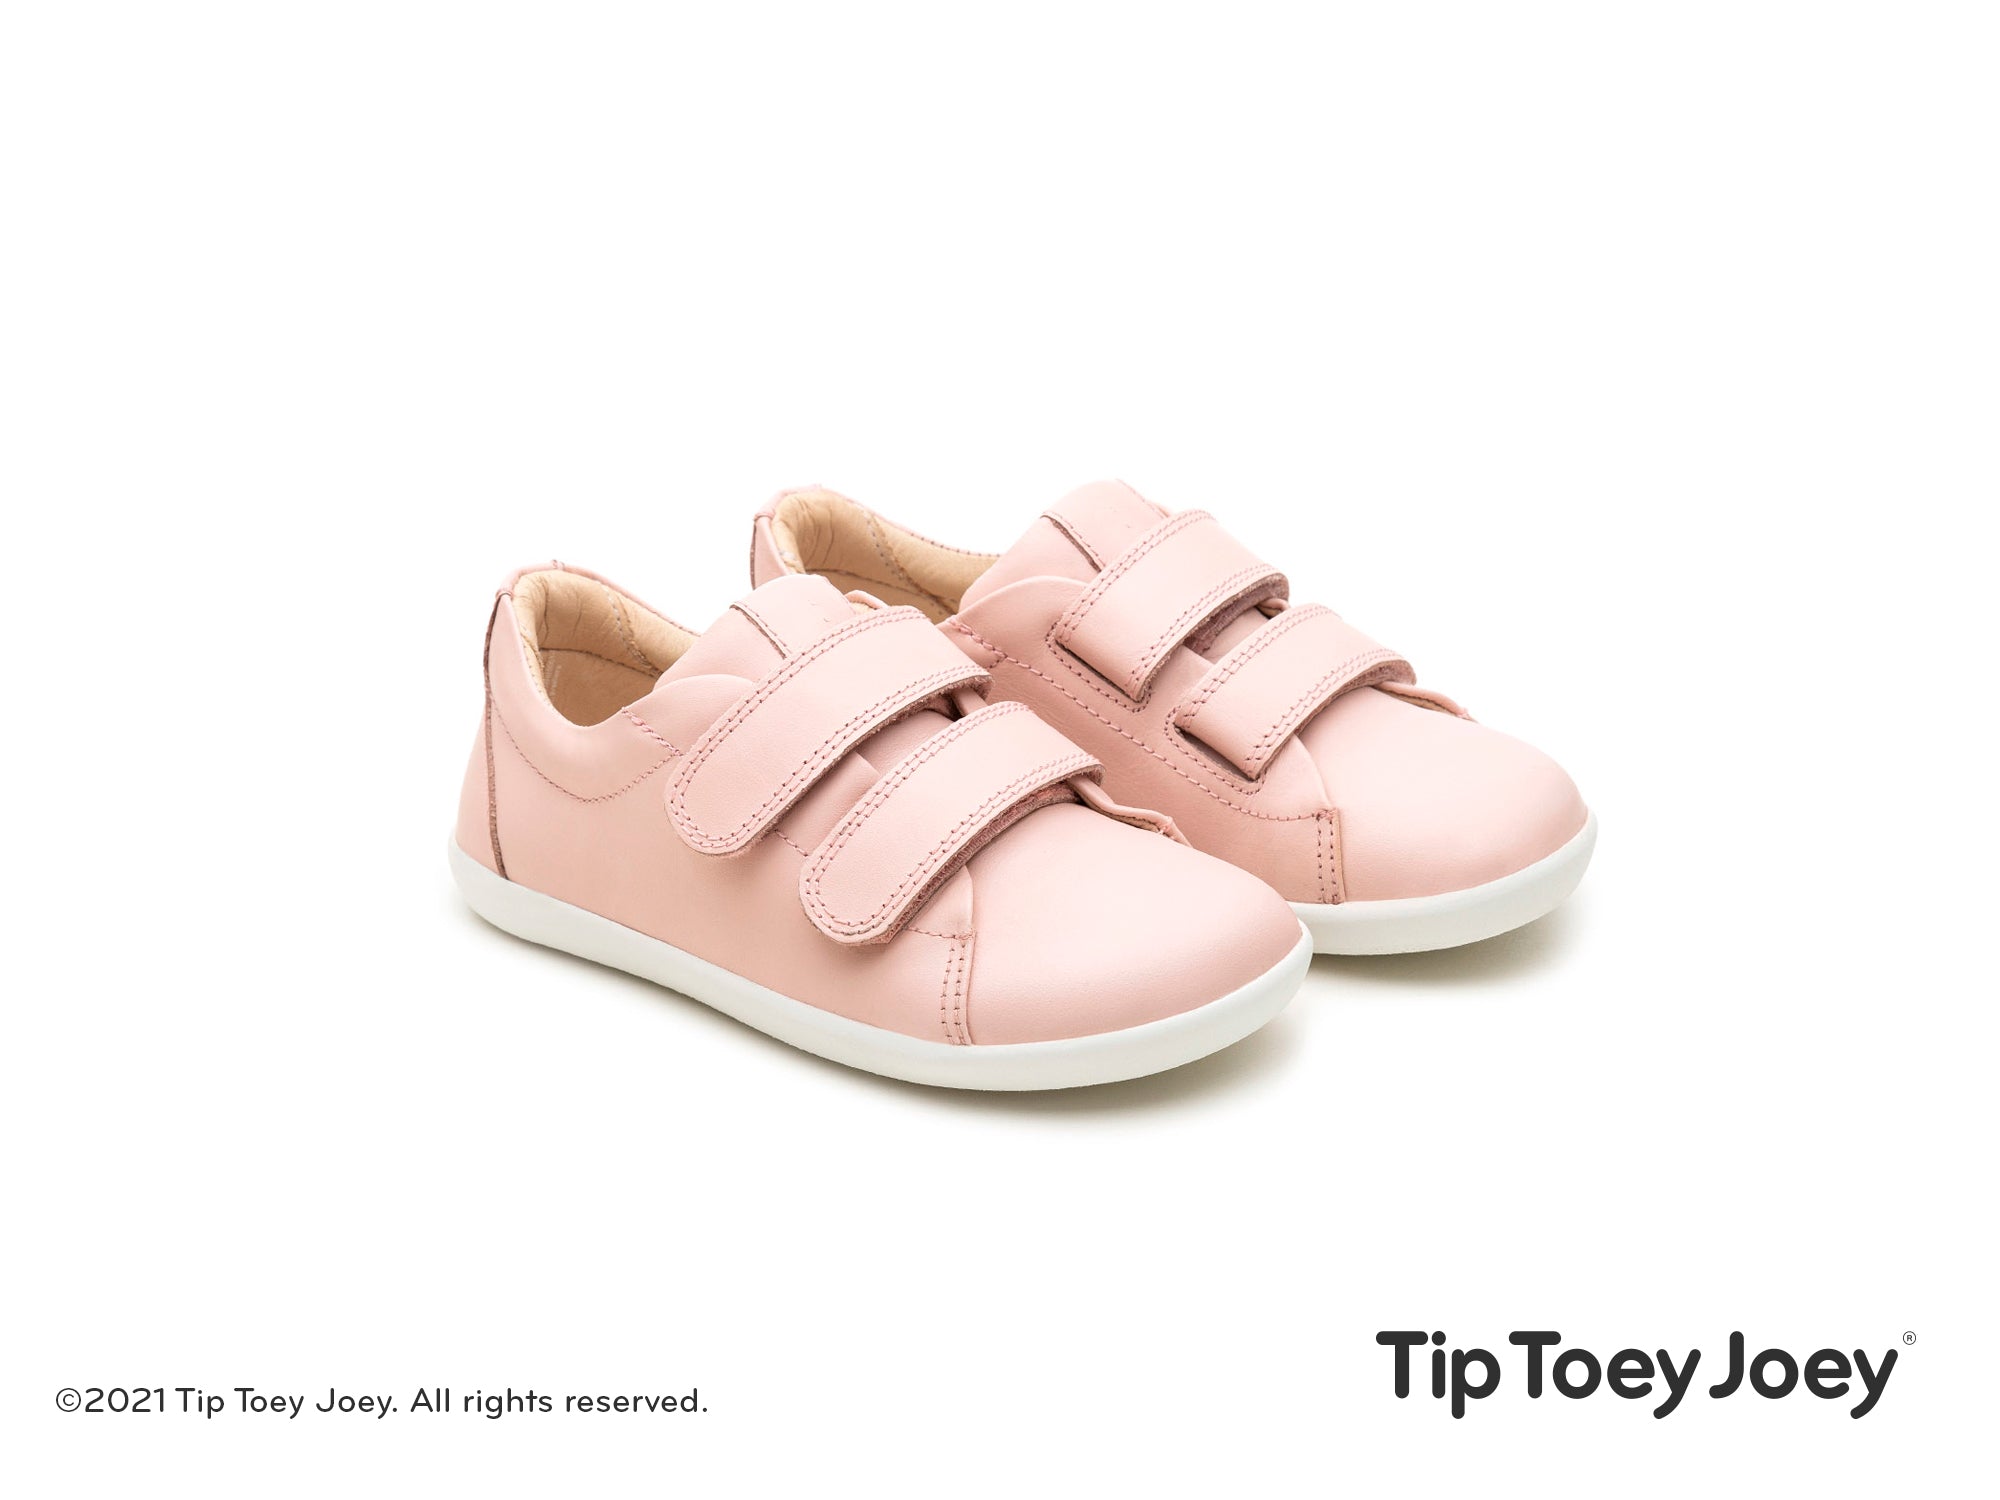 Tip Toey Joey Little Rush Shoes - Cotton Candy